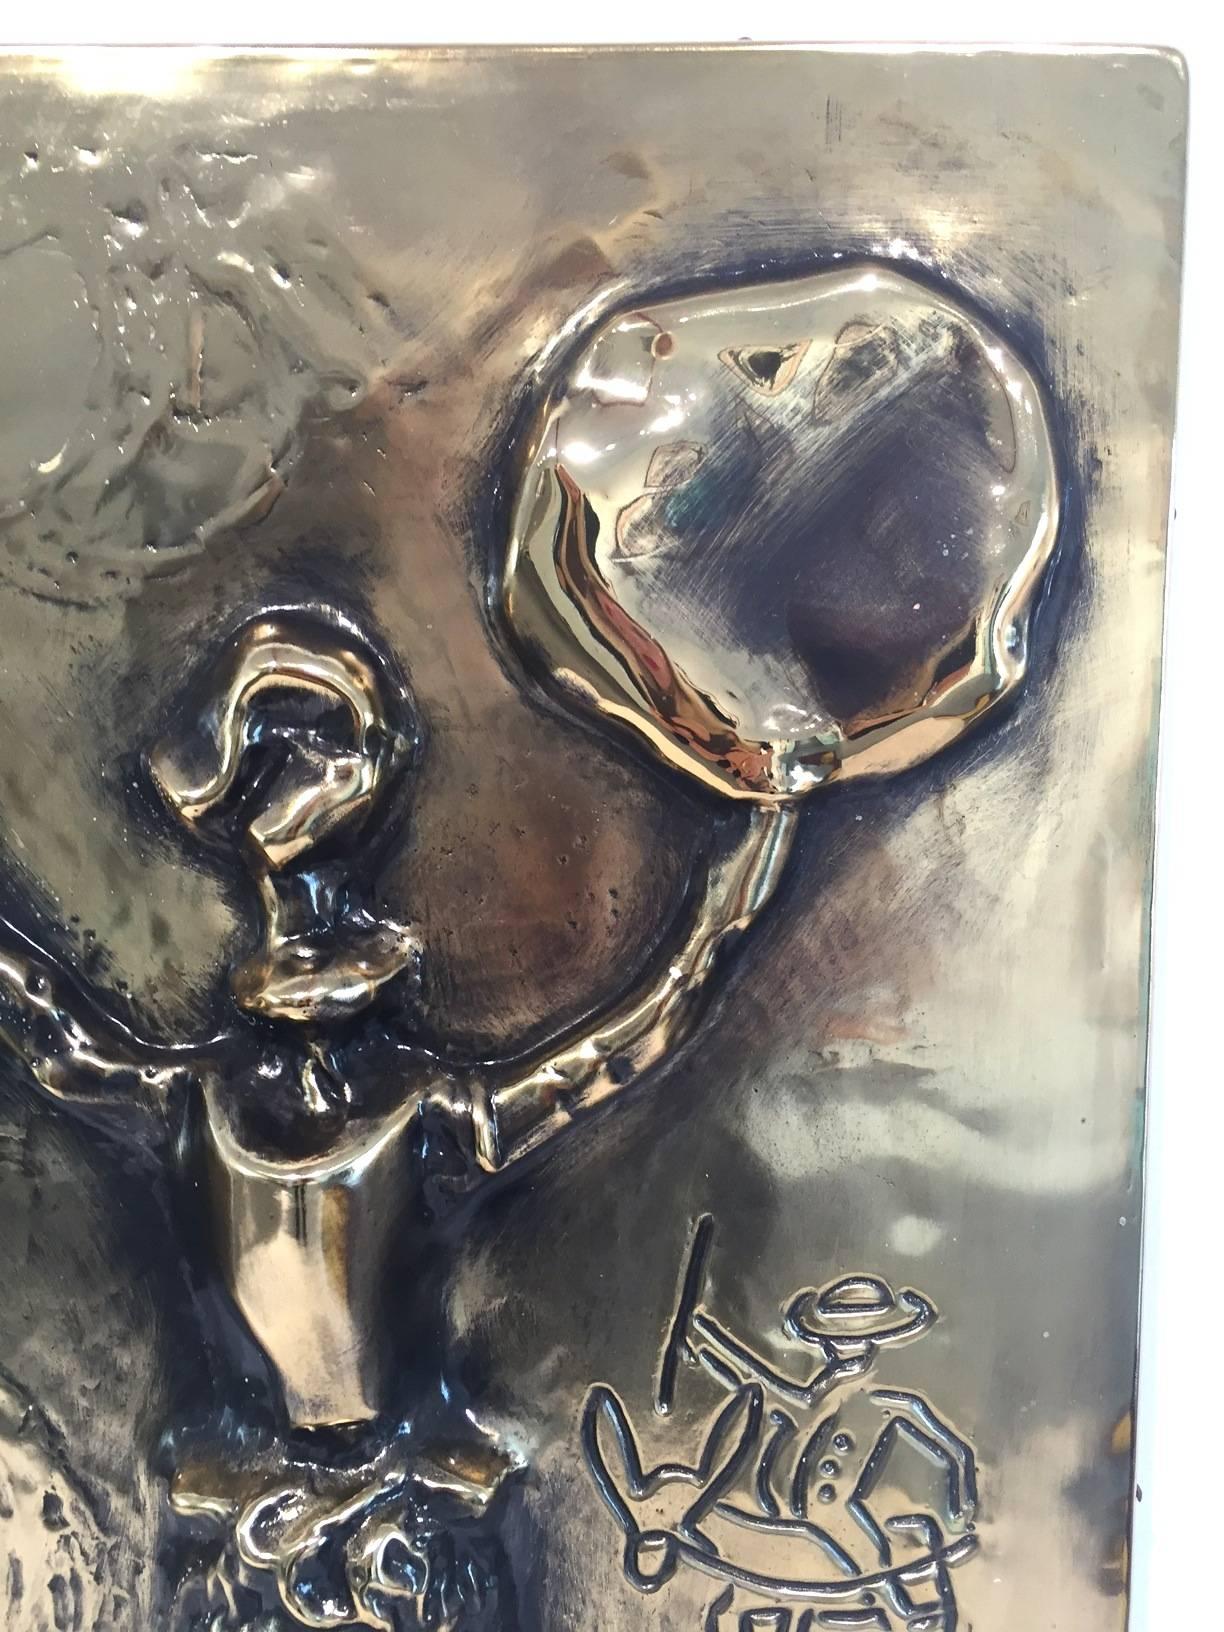 TECHNICAL INFORMATION:

Salvador Dalí
Don Quixote Bas Relief
1979
Gold bas relief, stamped, plated and hand-finished
27 x 19 x 3 in.
Edition of 160
Signed and numbered

Accompanied with COA by Gregg Shienbaum Fine Art

Condition: This work is in